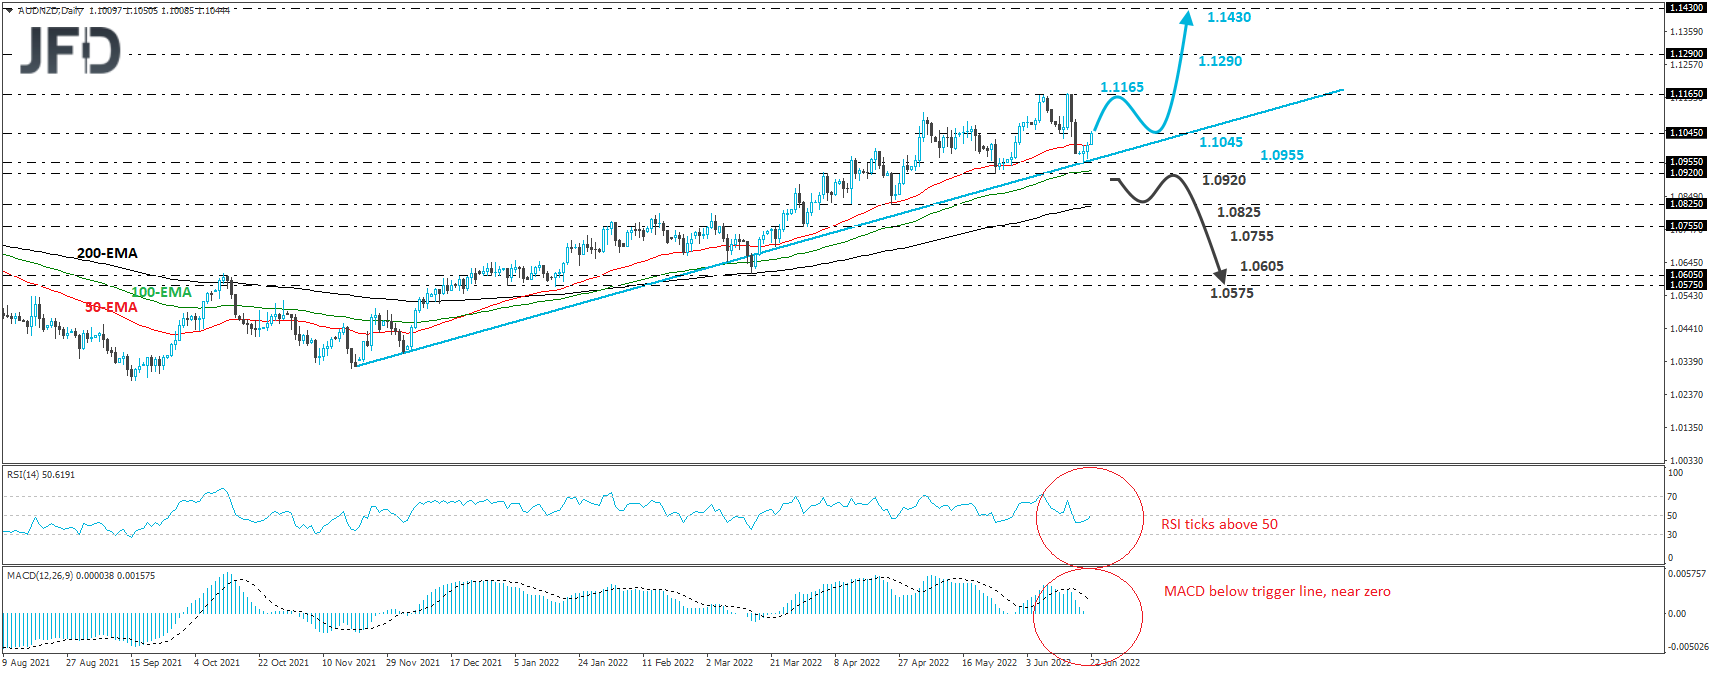 AUD/NZD daily chart technical analysis.